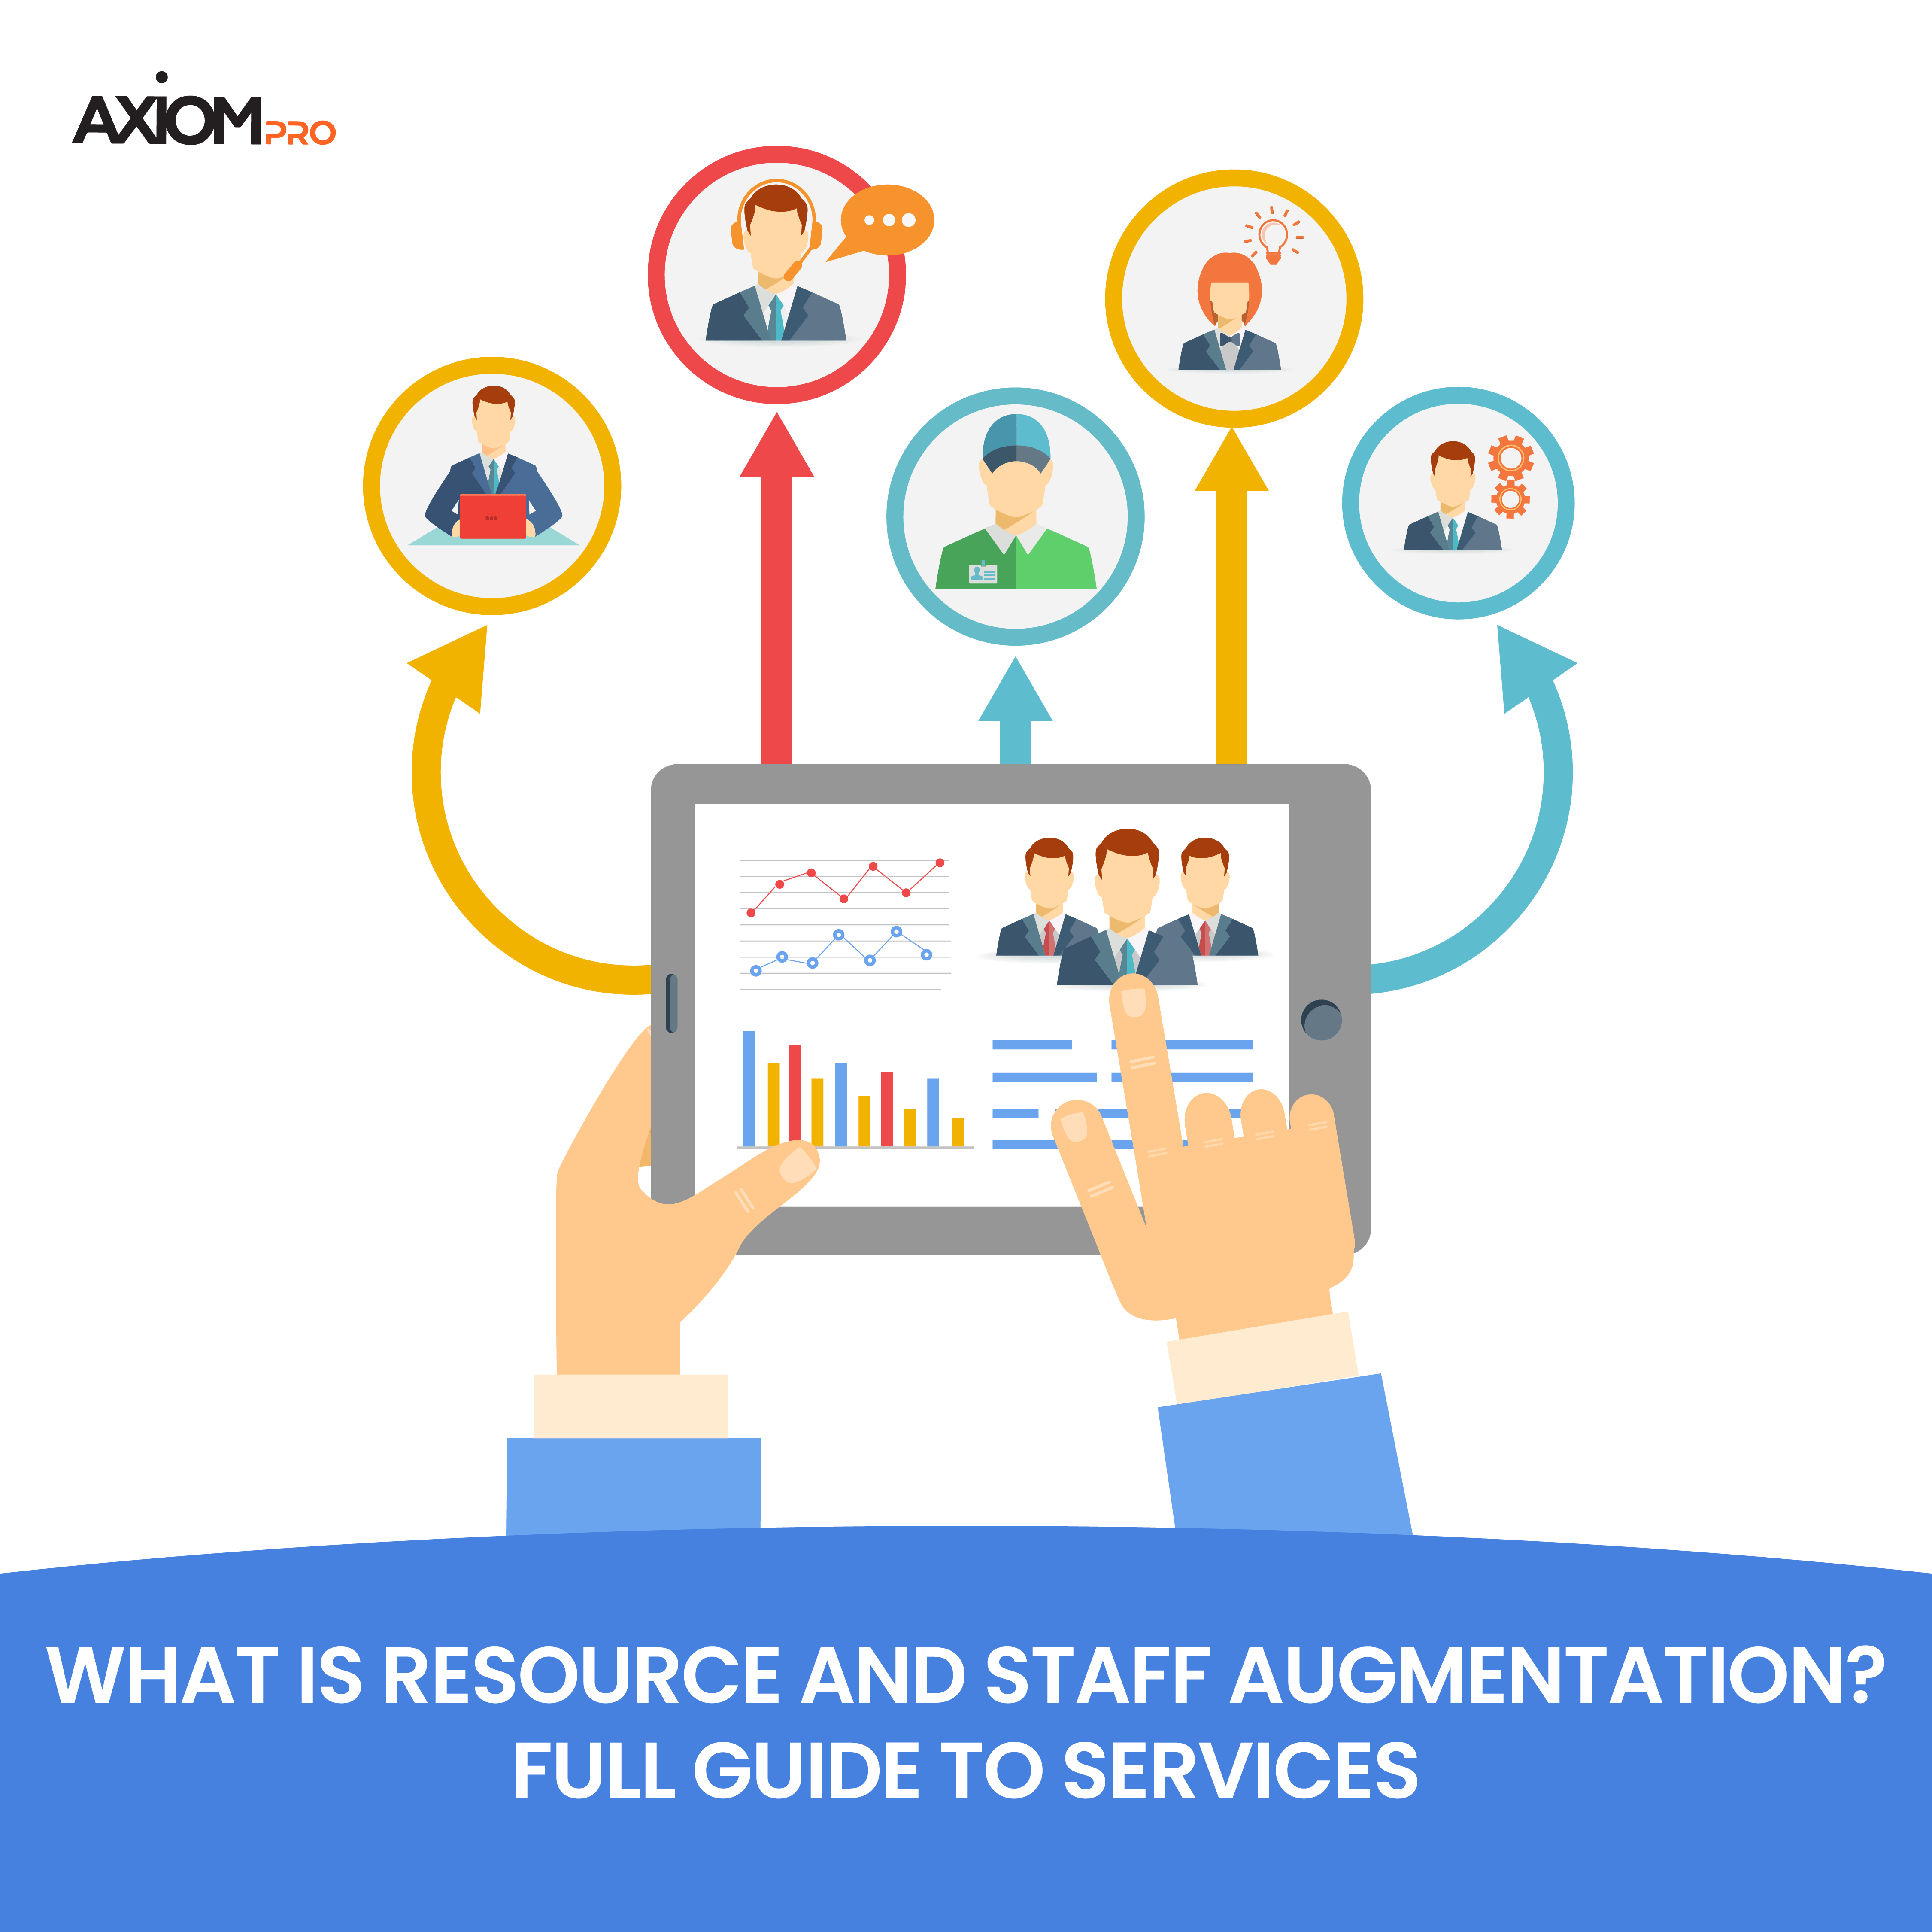 What is resource and staff augmentation? Full guide to services